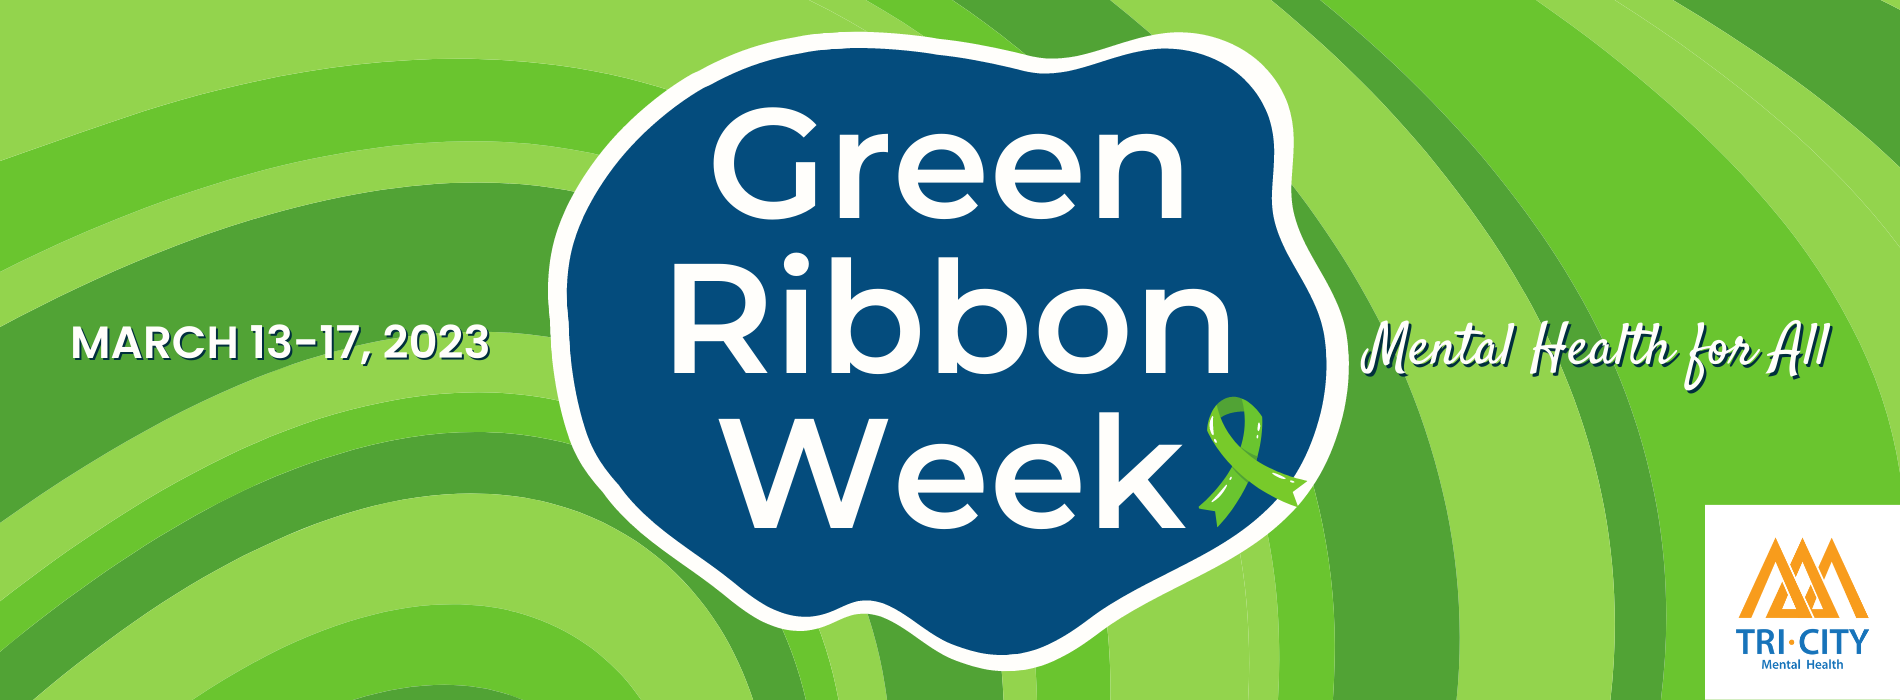 Green Ribbon Week March 13-17, 2023. Theme is Mental Health for All. 